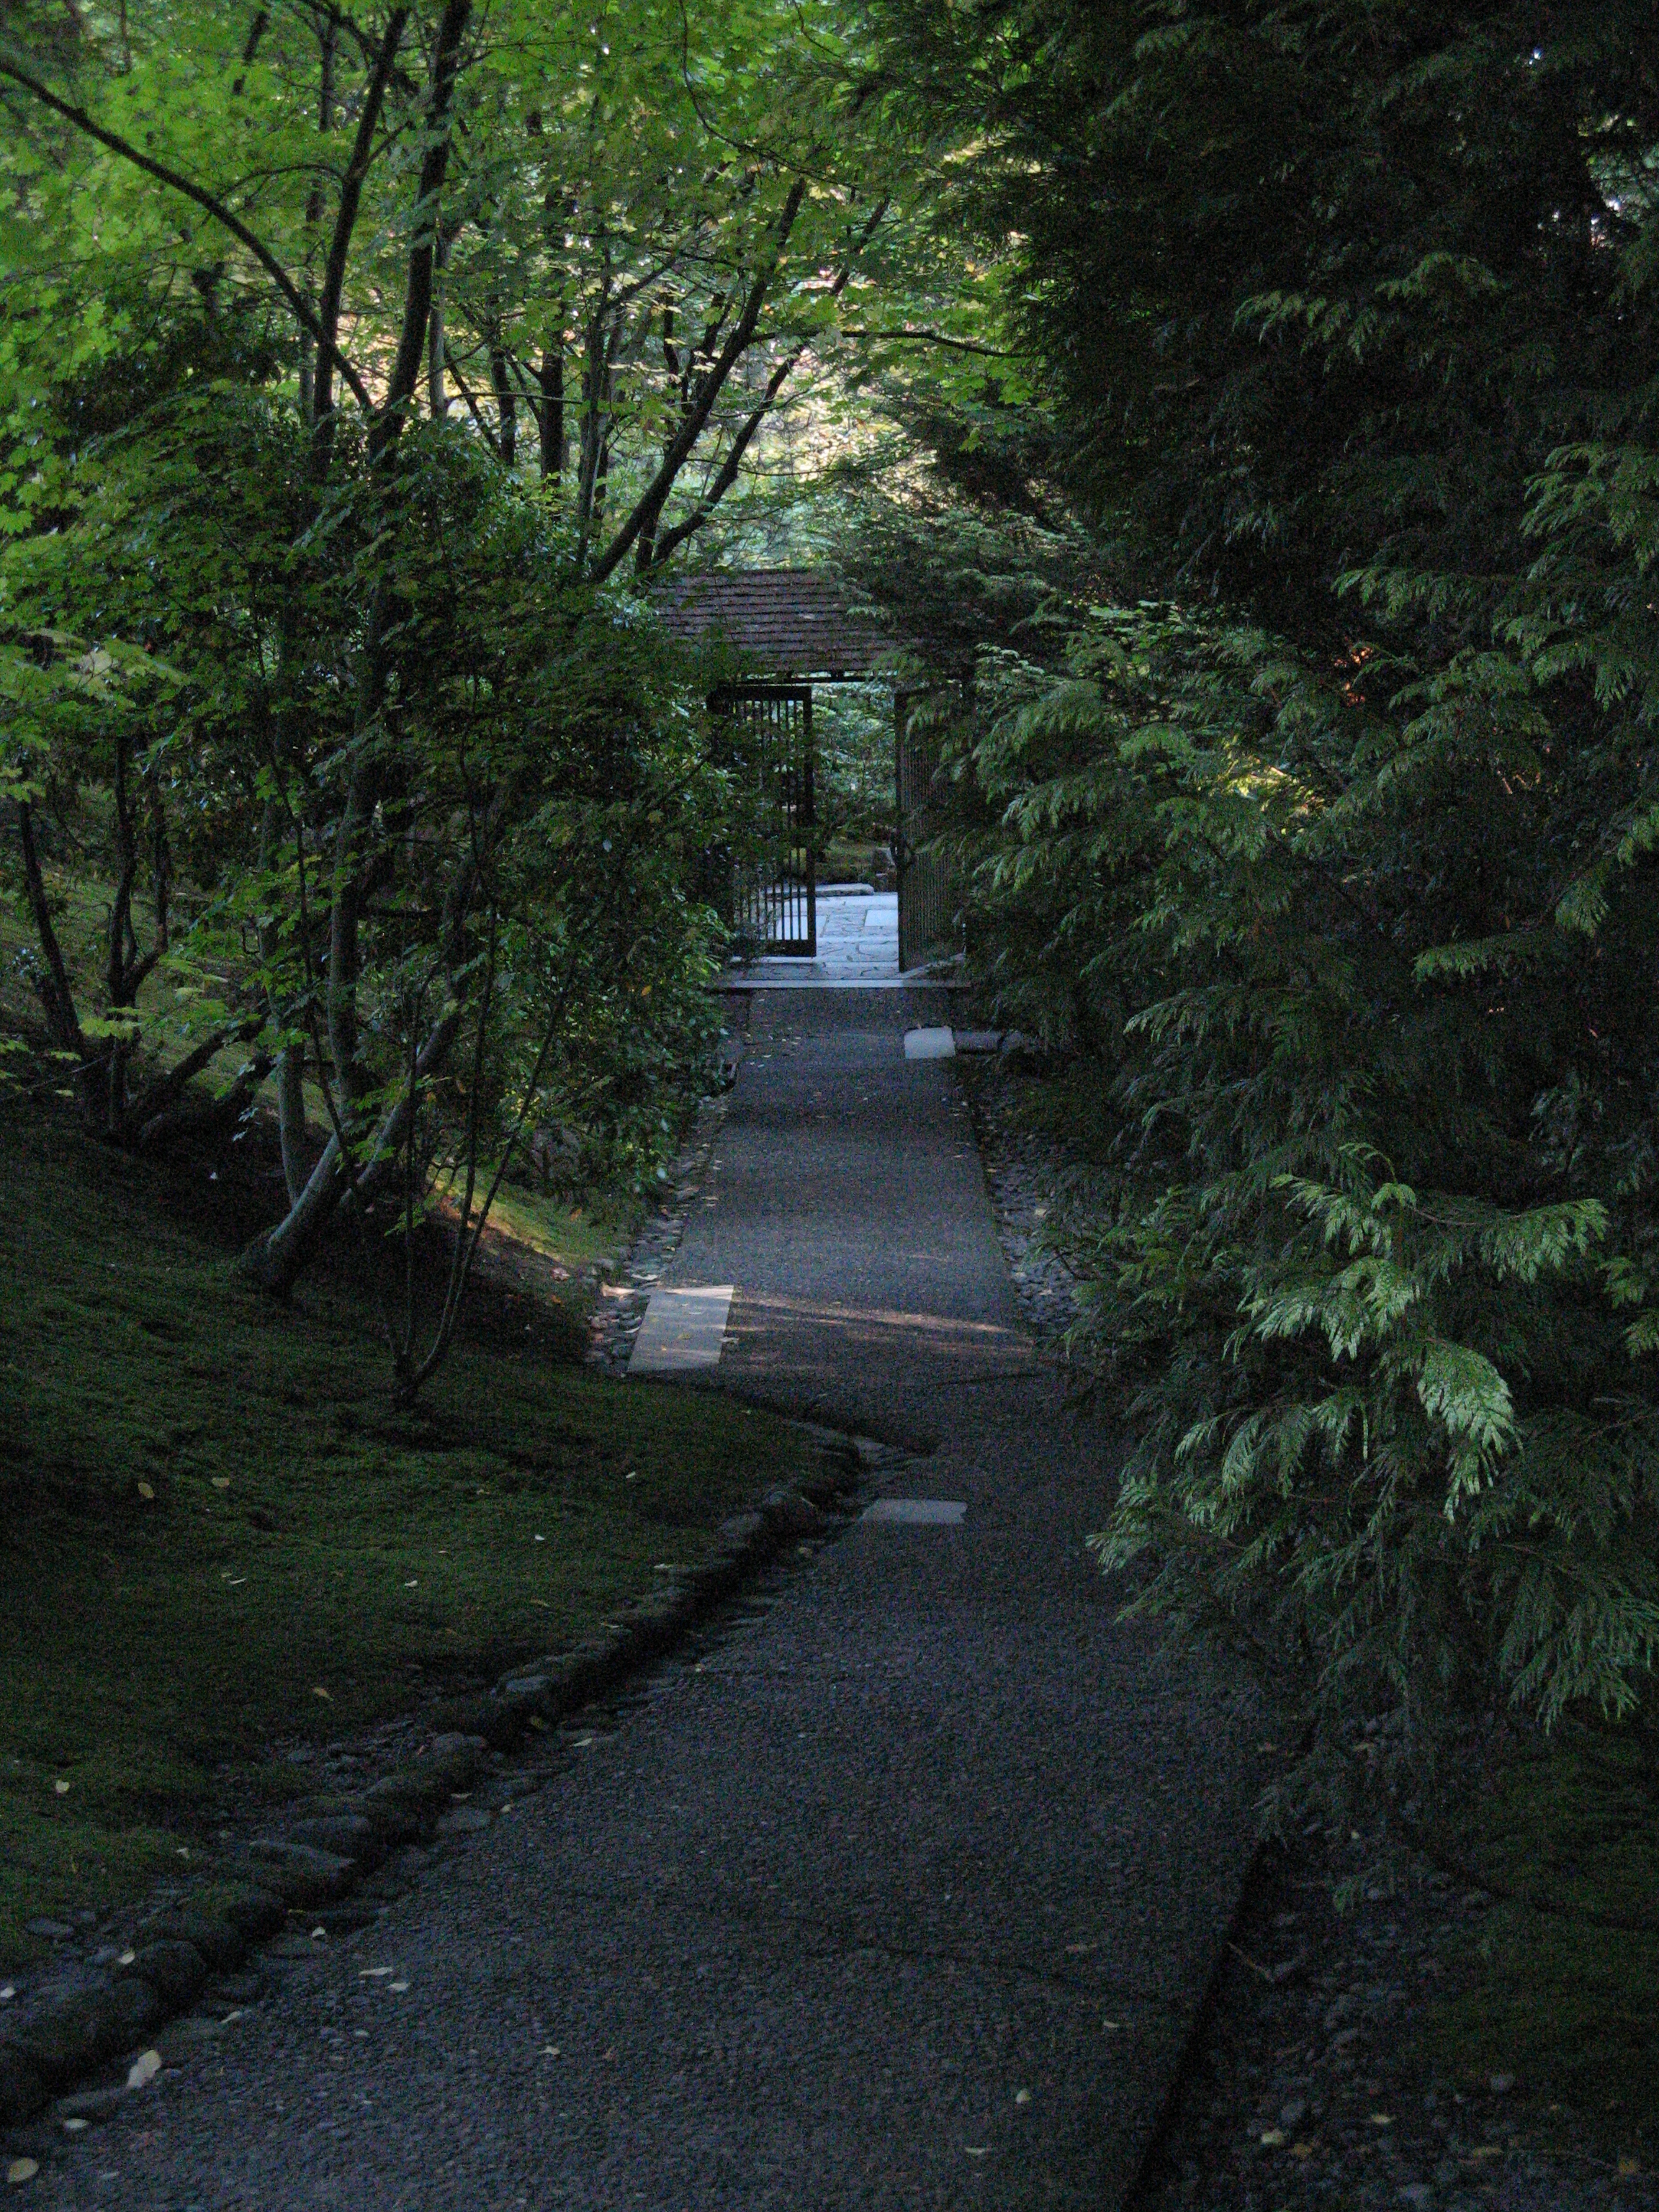 Lighted Path to the Sand and Stone Garden